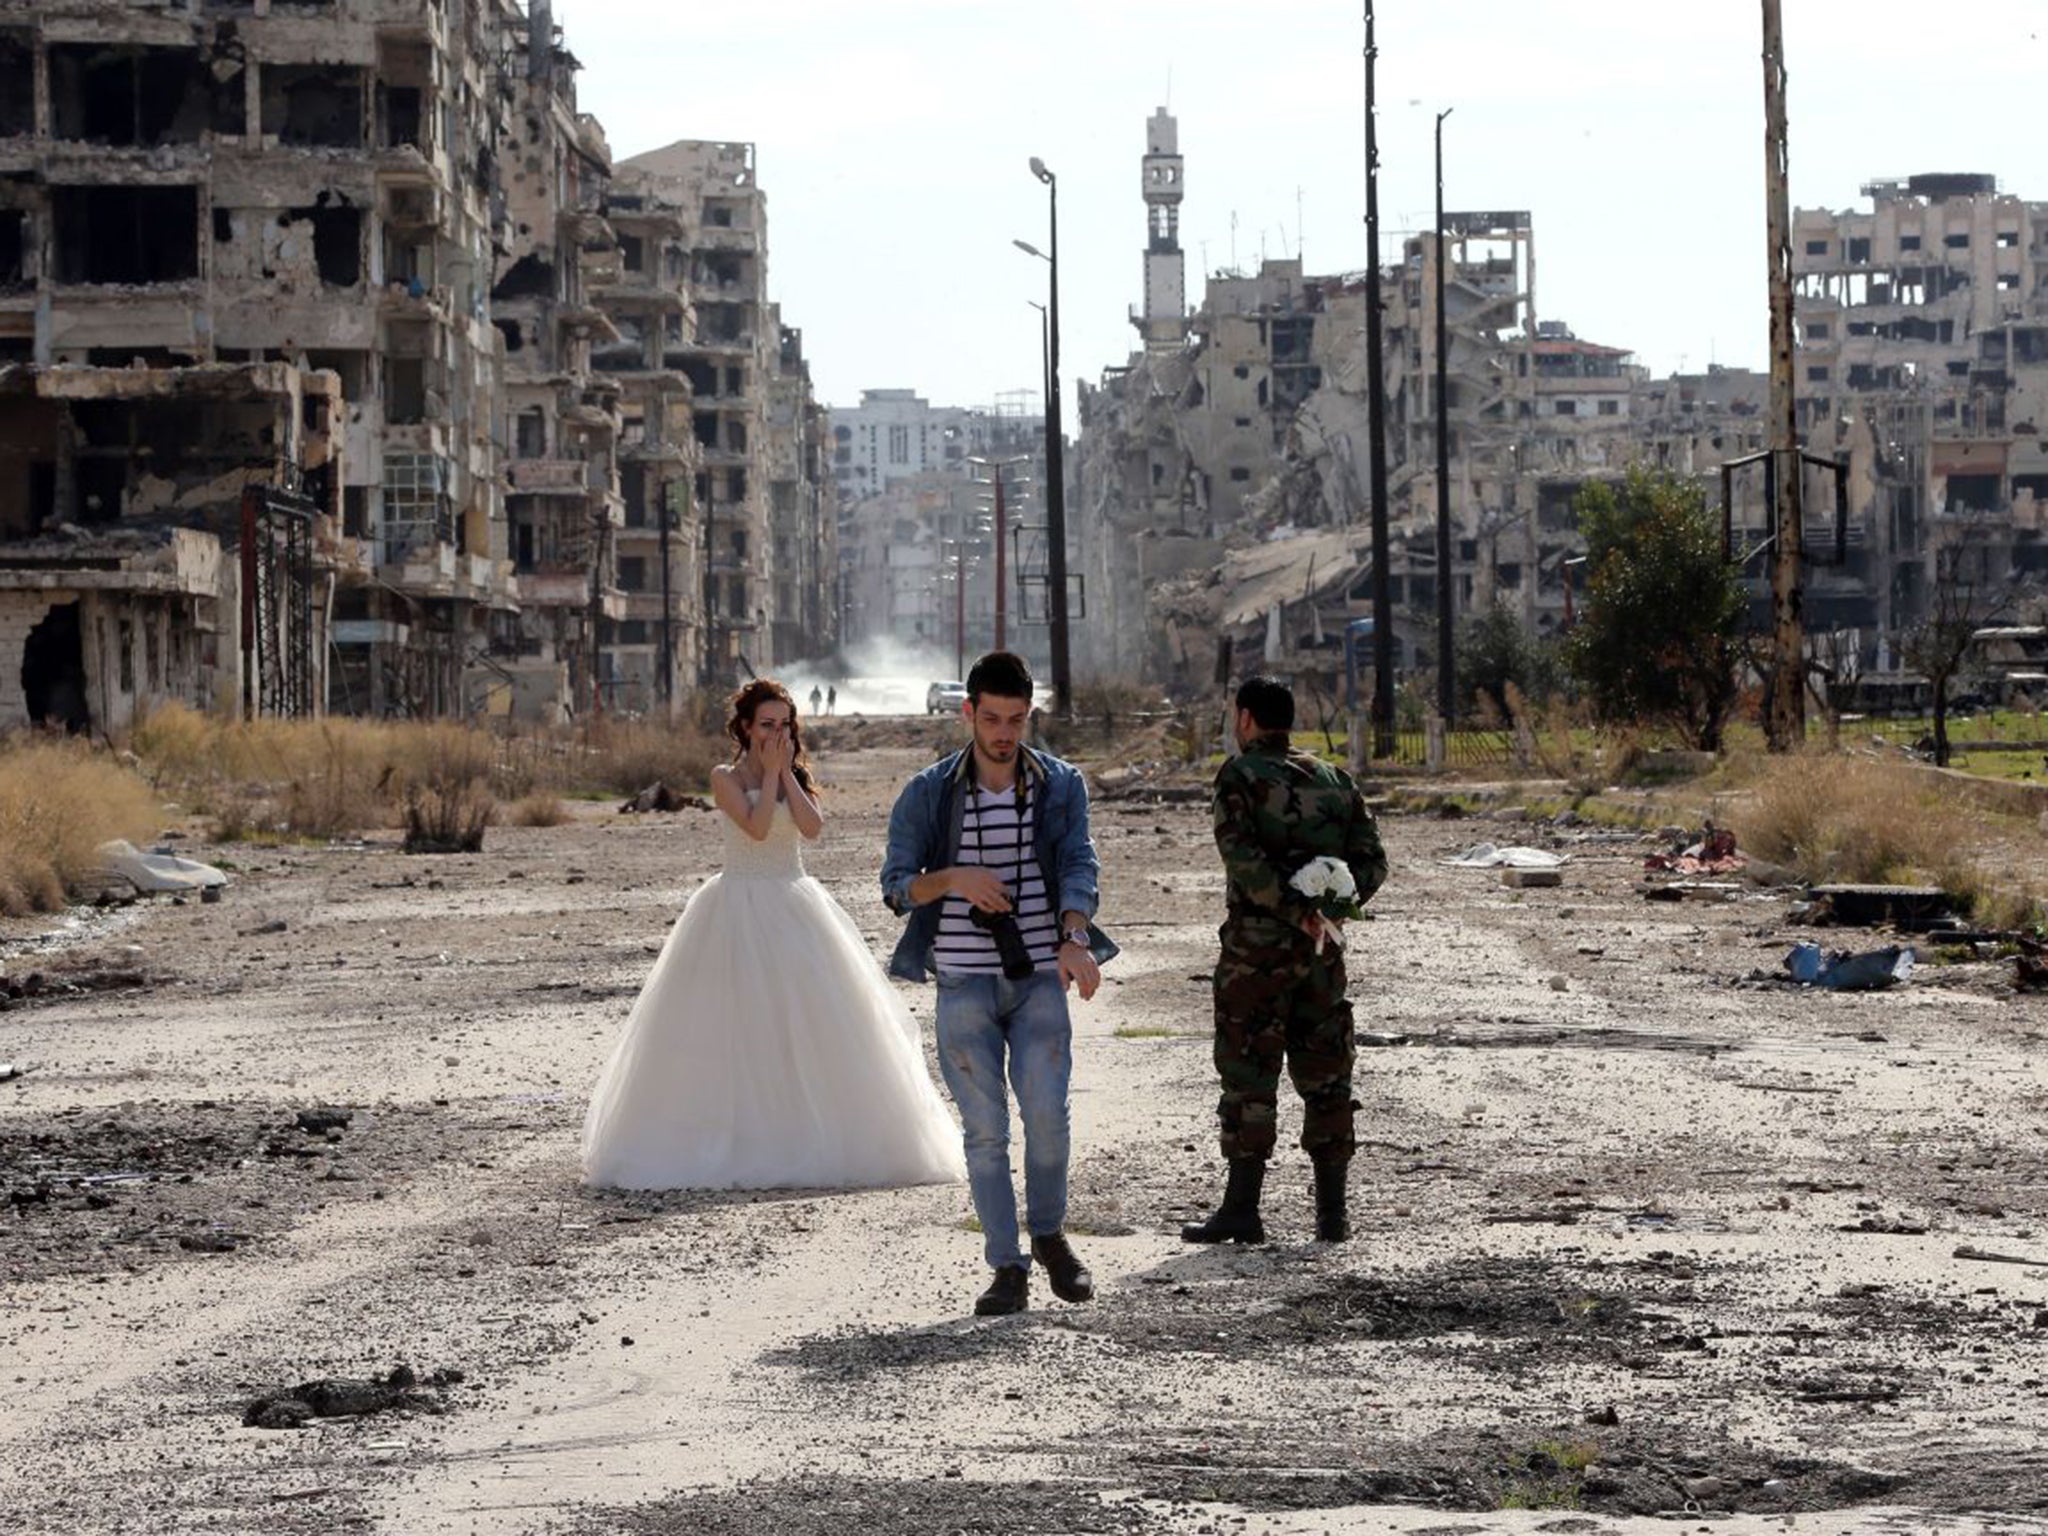 A Syrian couple preparing for their wedding photos in Homs